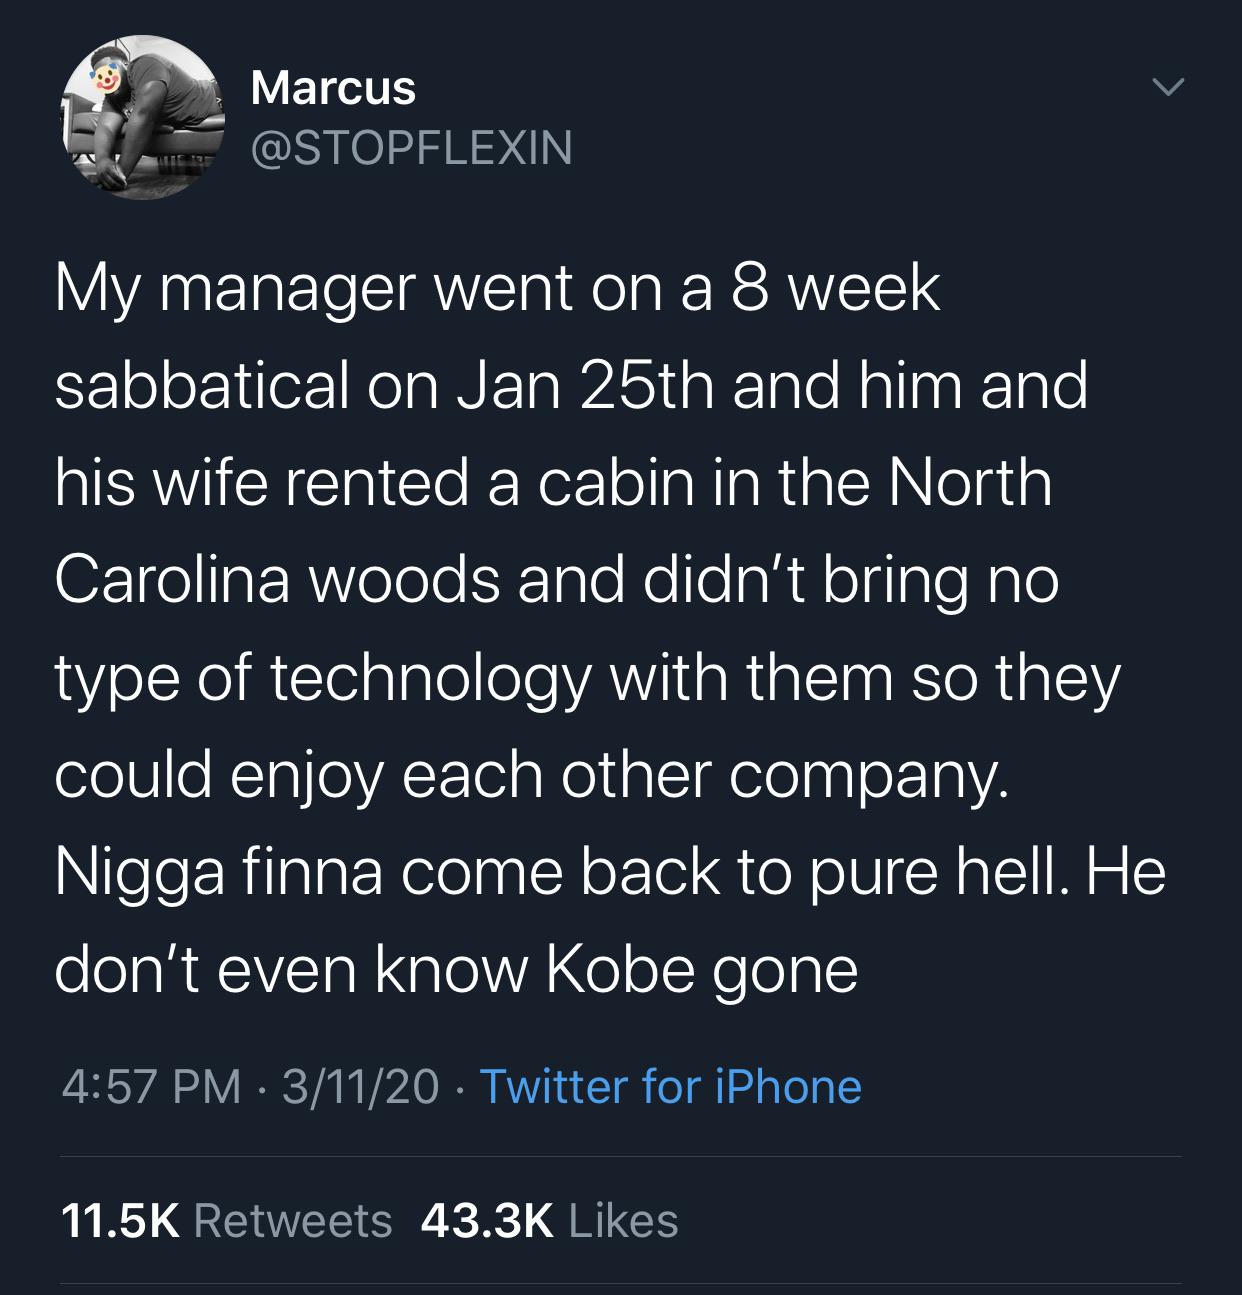 Tweet, Kobe, Sad, Coronavirus, Lockdown black-twitter-memes tweets-kobe-hufflepuff-corona text: Marcus @STOPFLEXIN My manager went on a 8 week sabbatical on Jan 25th and him and his wife rented a cabin in the North Carolina woods and didn't bring no type of technology with them so they could enjoy each other company. Nigga finna come back to pure hell. He don't even know Kobe gone 4:57 PM • 3/11/20 • Twitter for iPhone Likes 43.3K 11.5K Retweets 